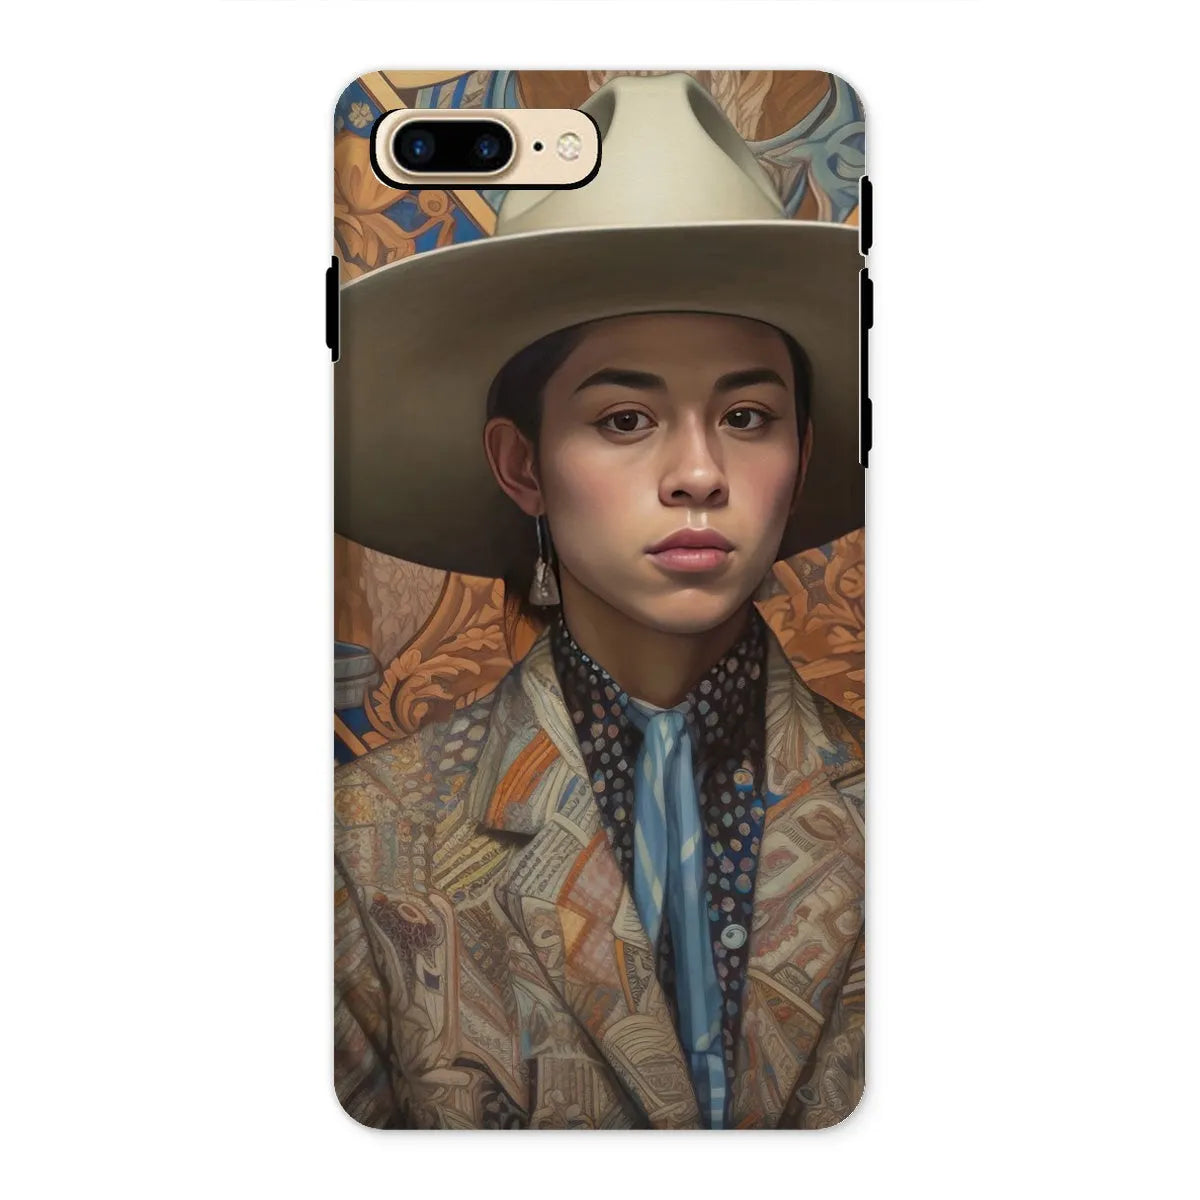 Angel The Transgender Cowboy - F2m Outlaw Art Phone Case - Iphone 8 Plus / Matte - Mobile Phone Cases - Aesthetic Art